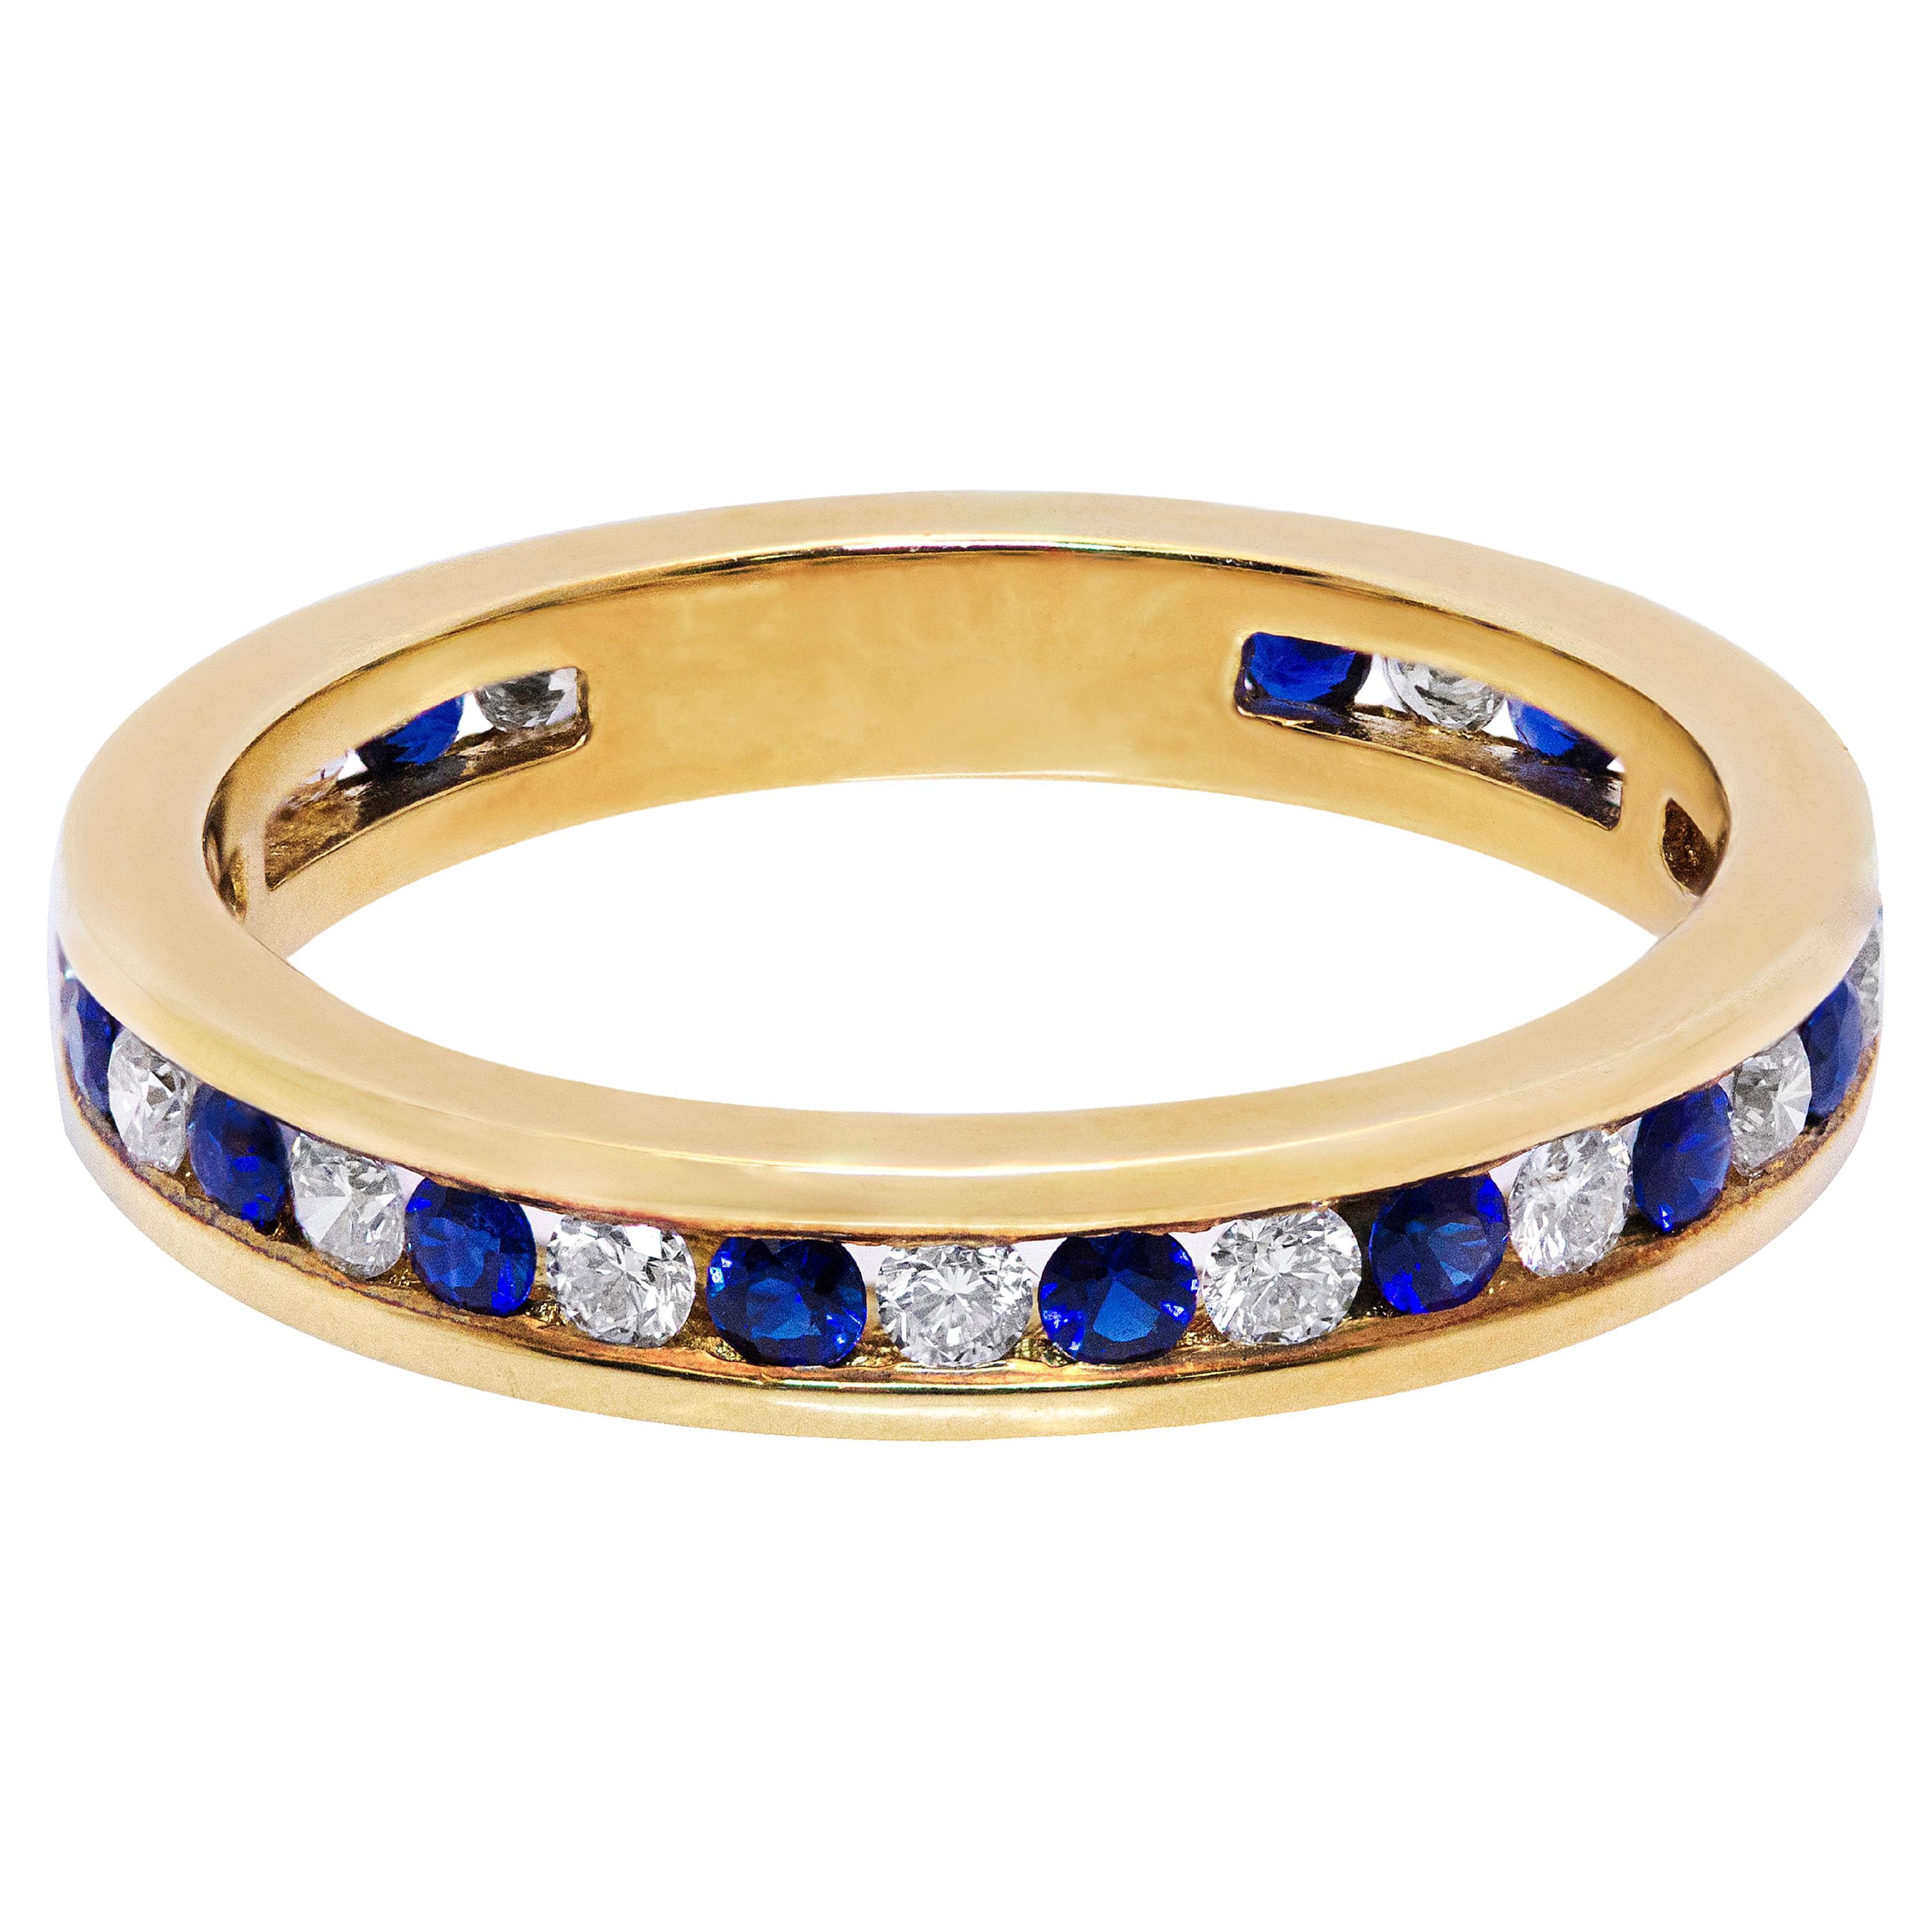 0.94 Carats Total Alternating Round Cut Sapphire & Diamond Eternity Wedding Band For Sale